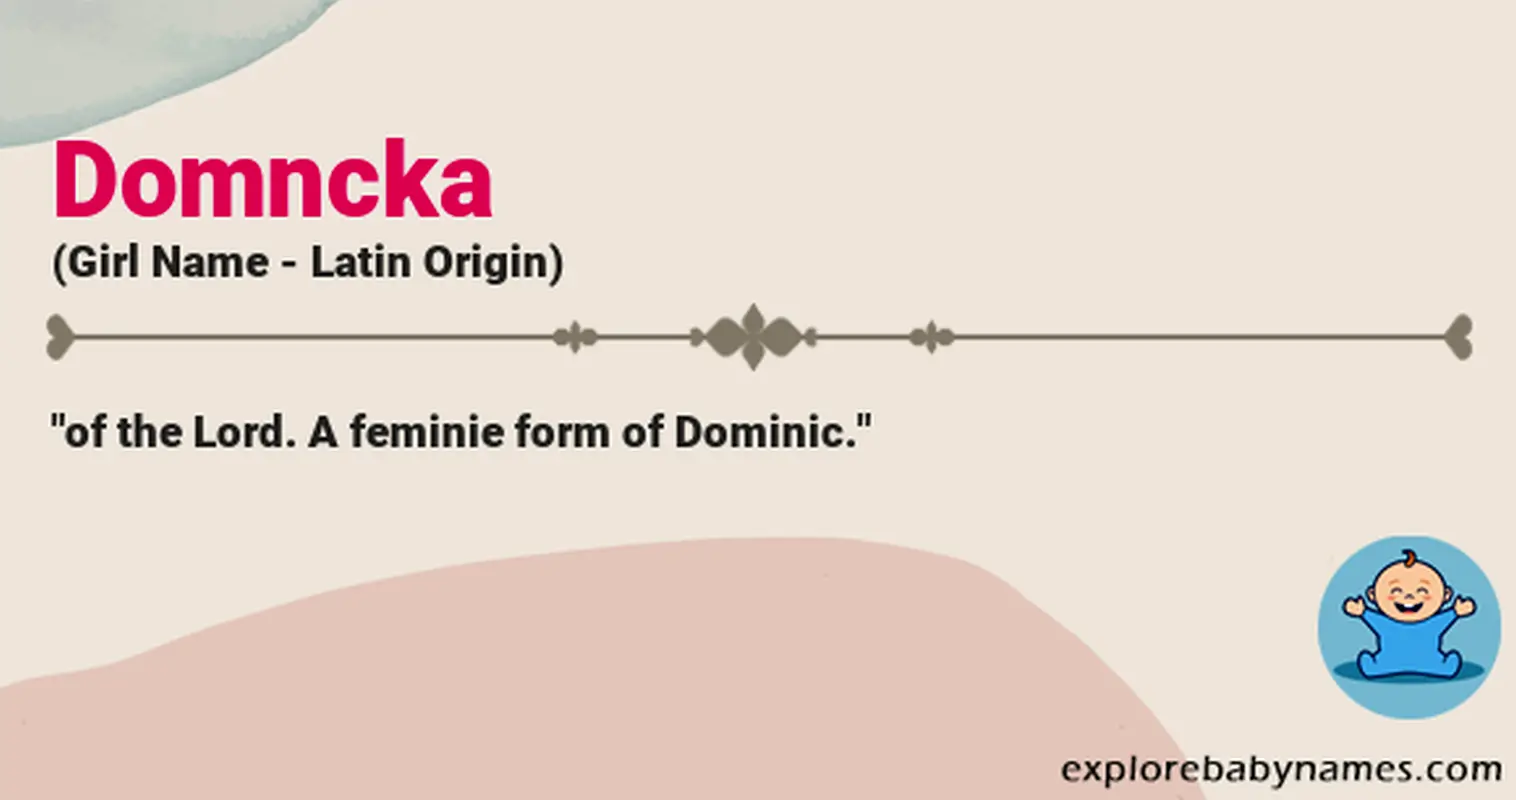 Meaning of Domncka